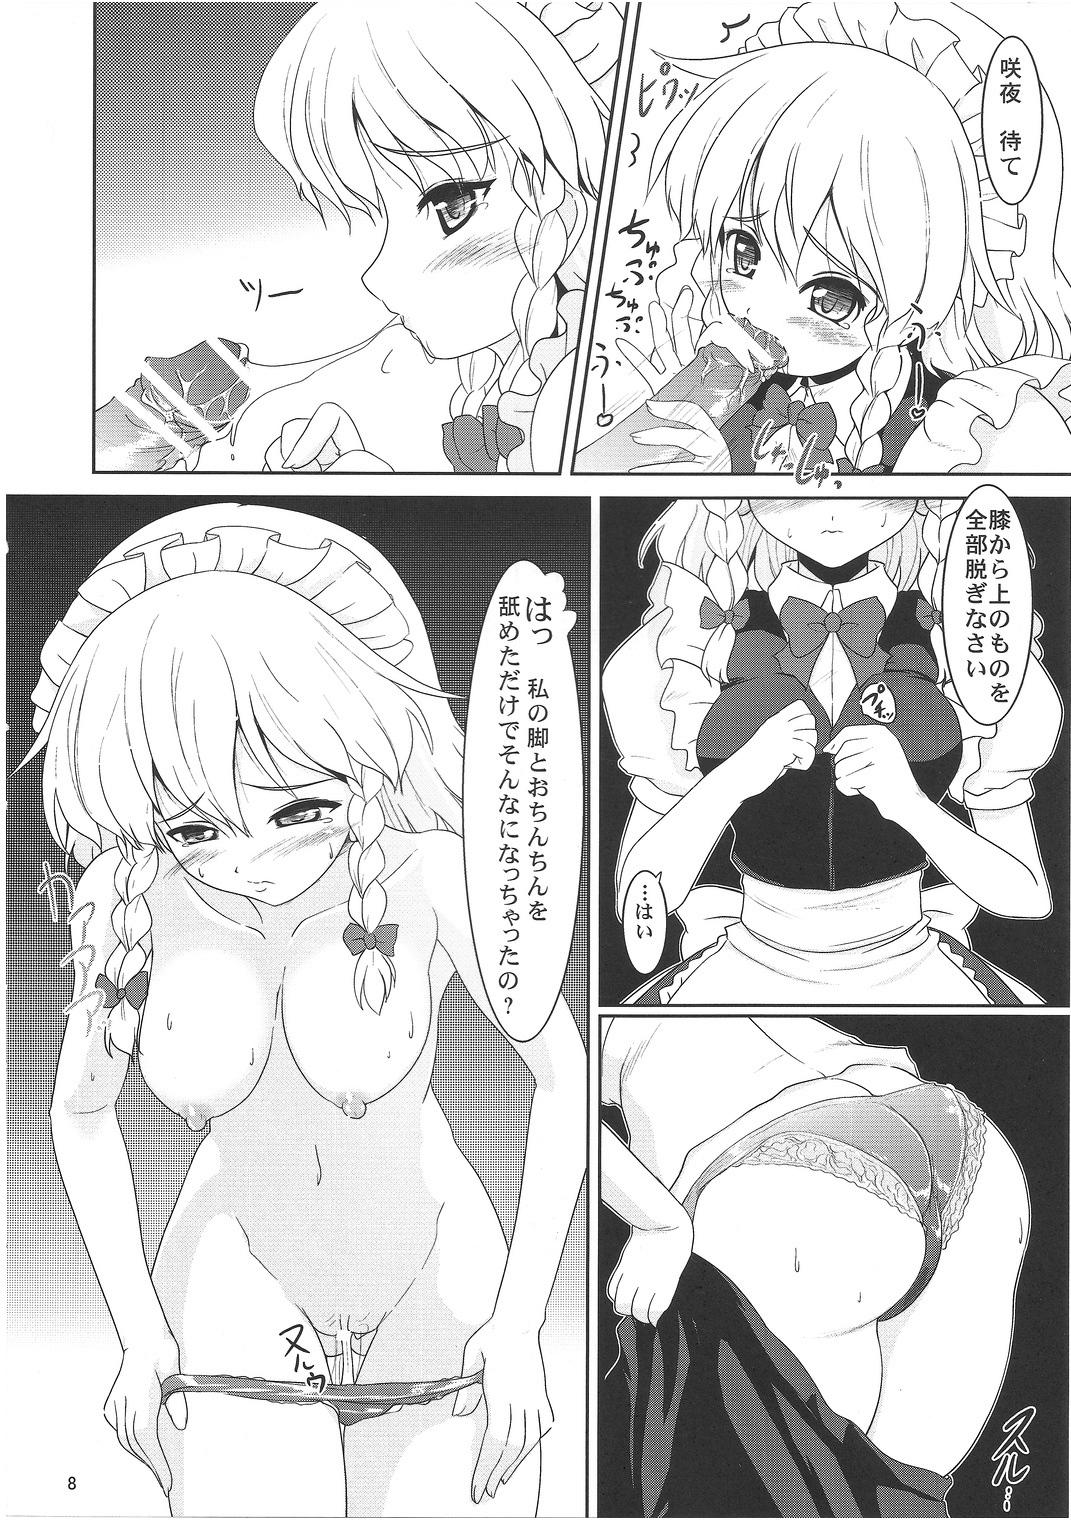 Retro Maid or Dog - Touhou project Interacial - Page 7